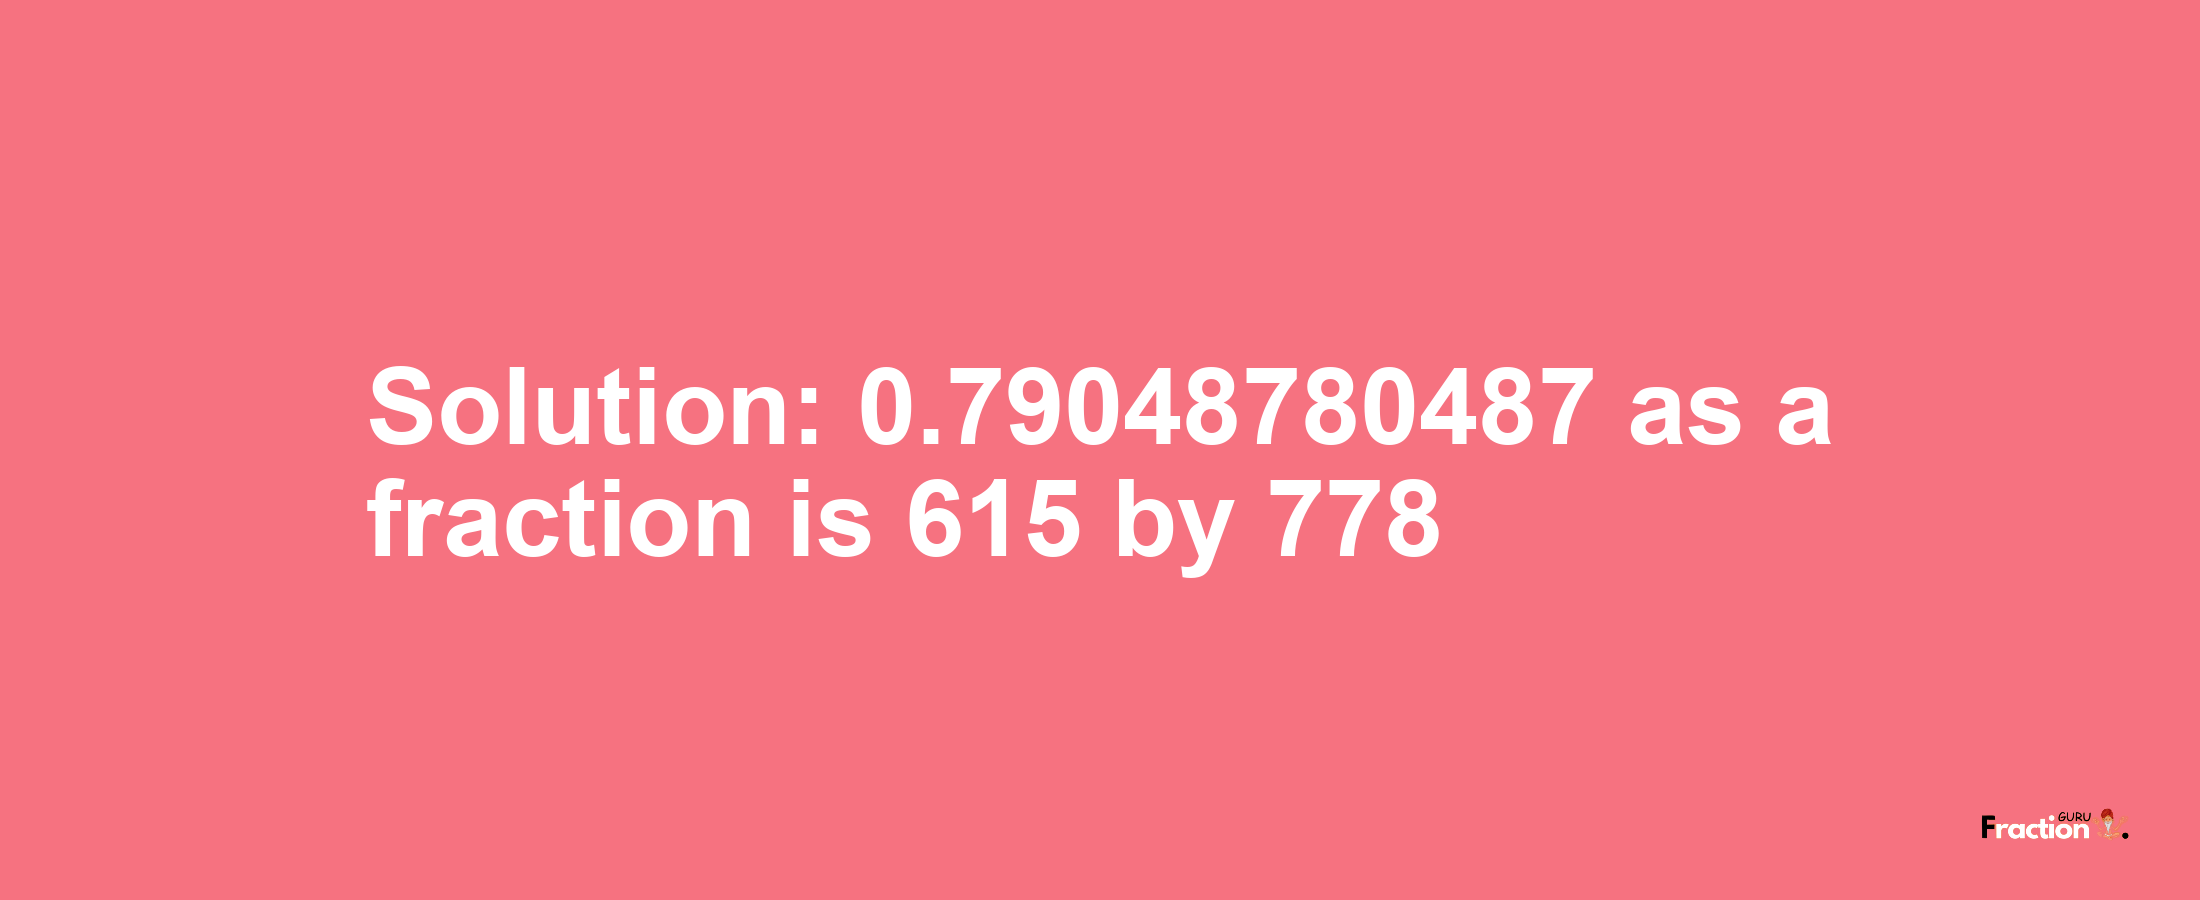 Solution:0.79048780487 as a fraction is 615/778